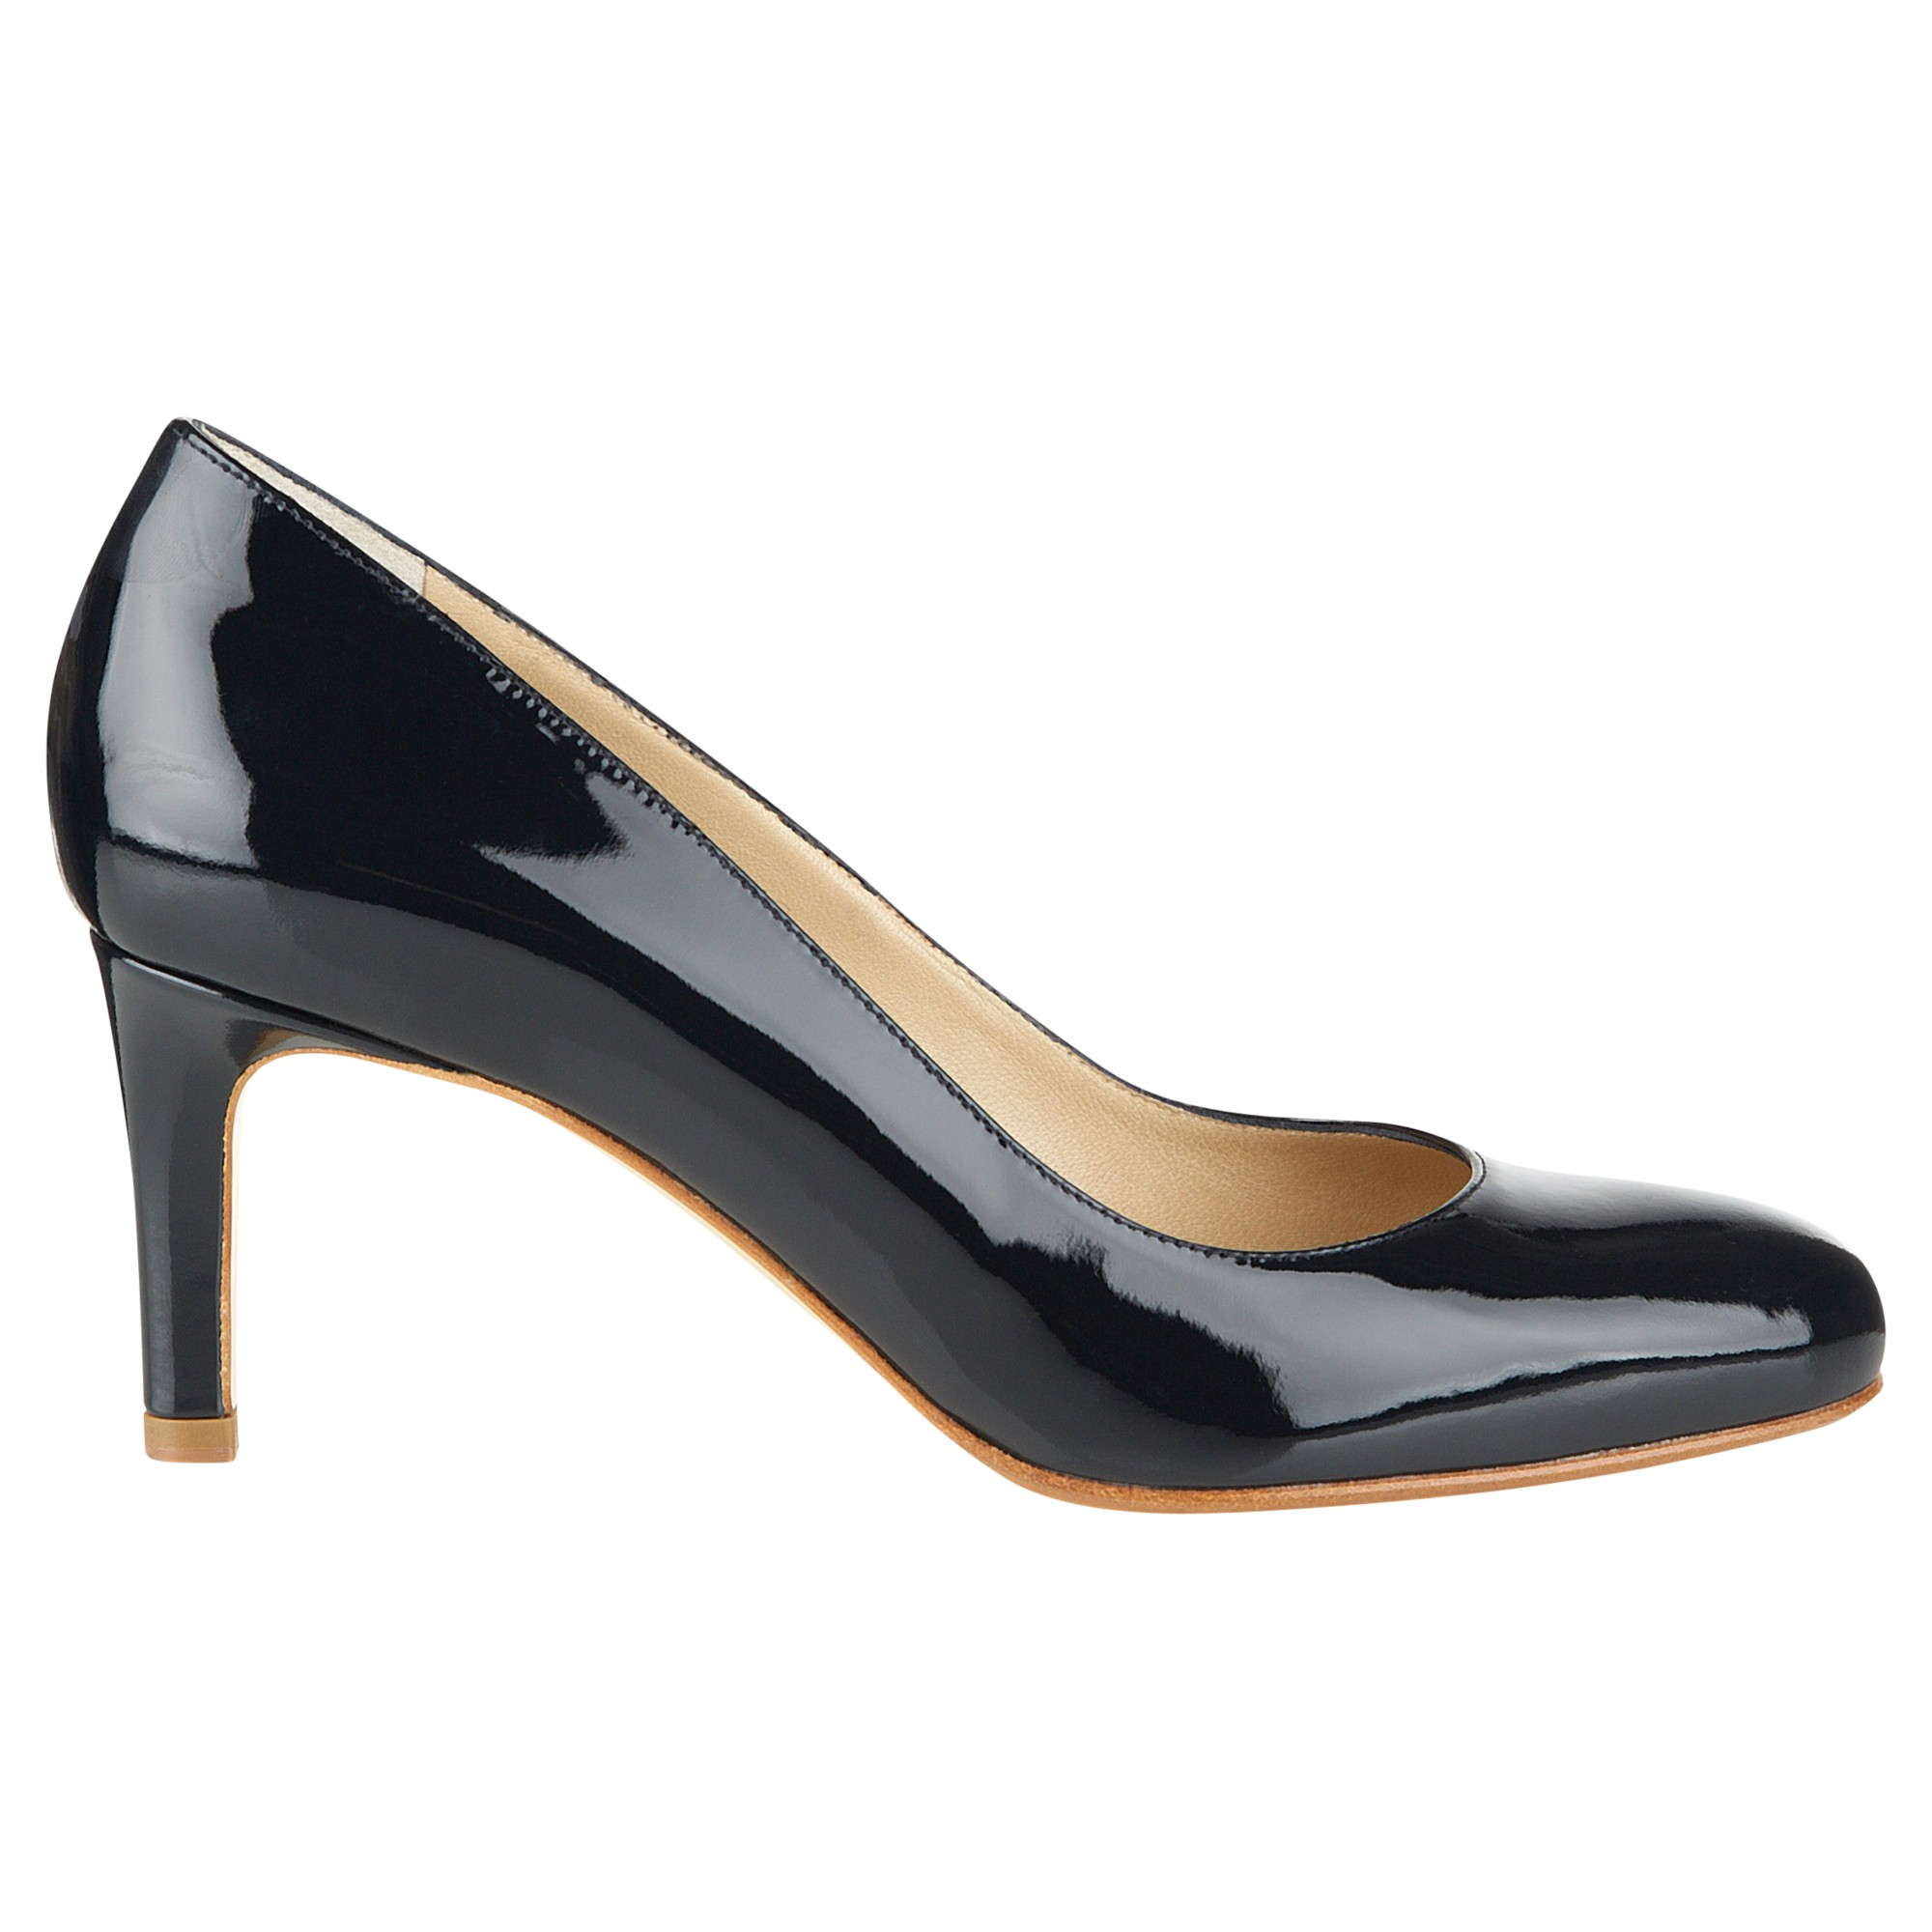 Hobbs Lizzie Leather Court Shoes in Navy Patent (Blue) - Lyst